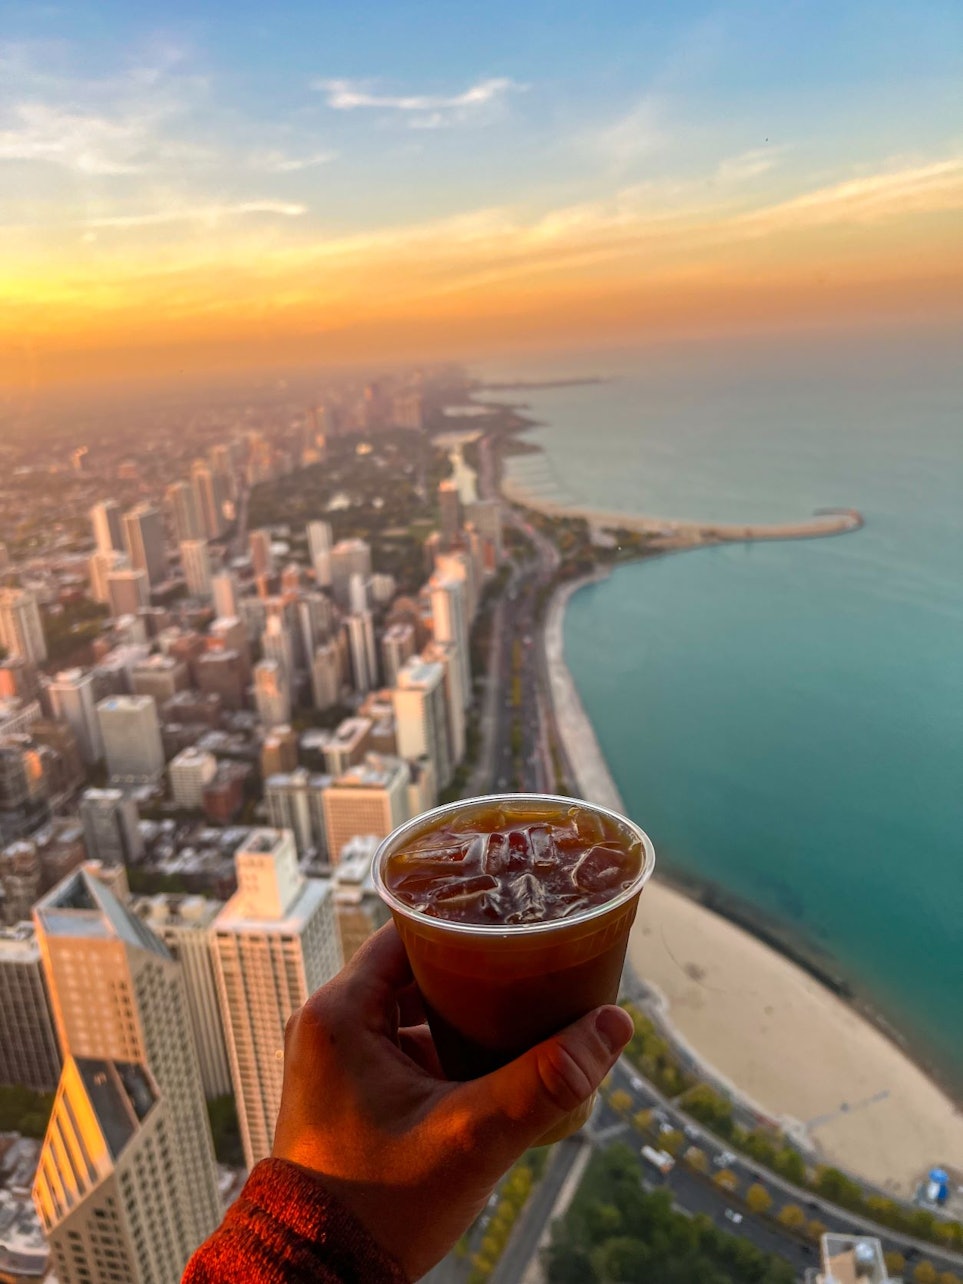 360 CHICAGO Observation Deck - Accommodations in Chicago